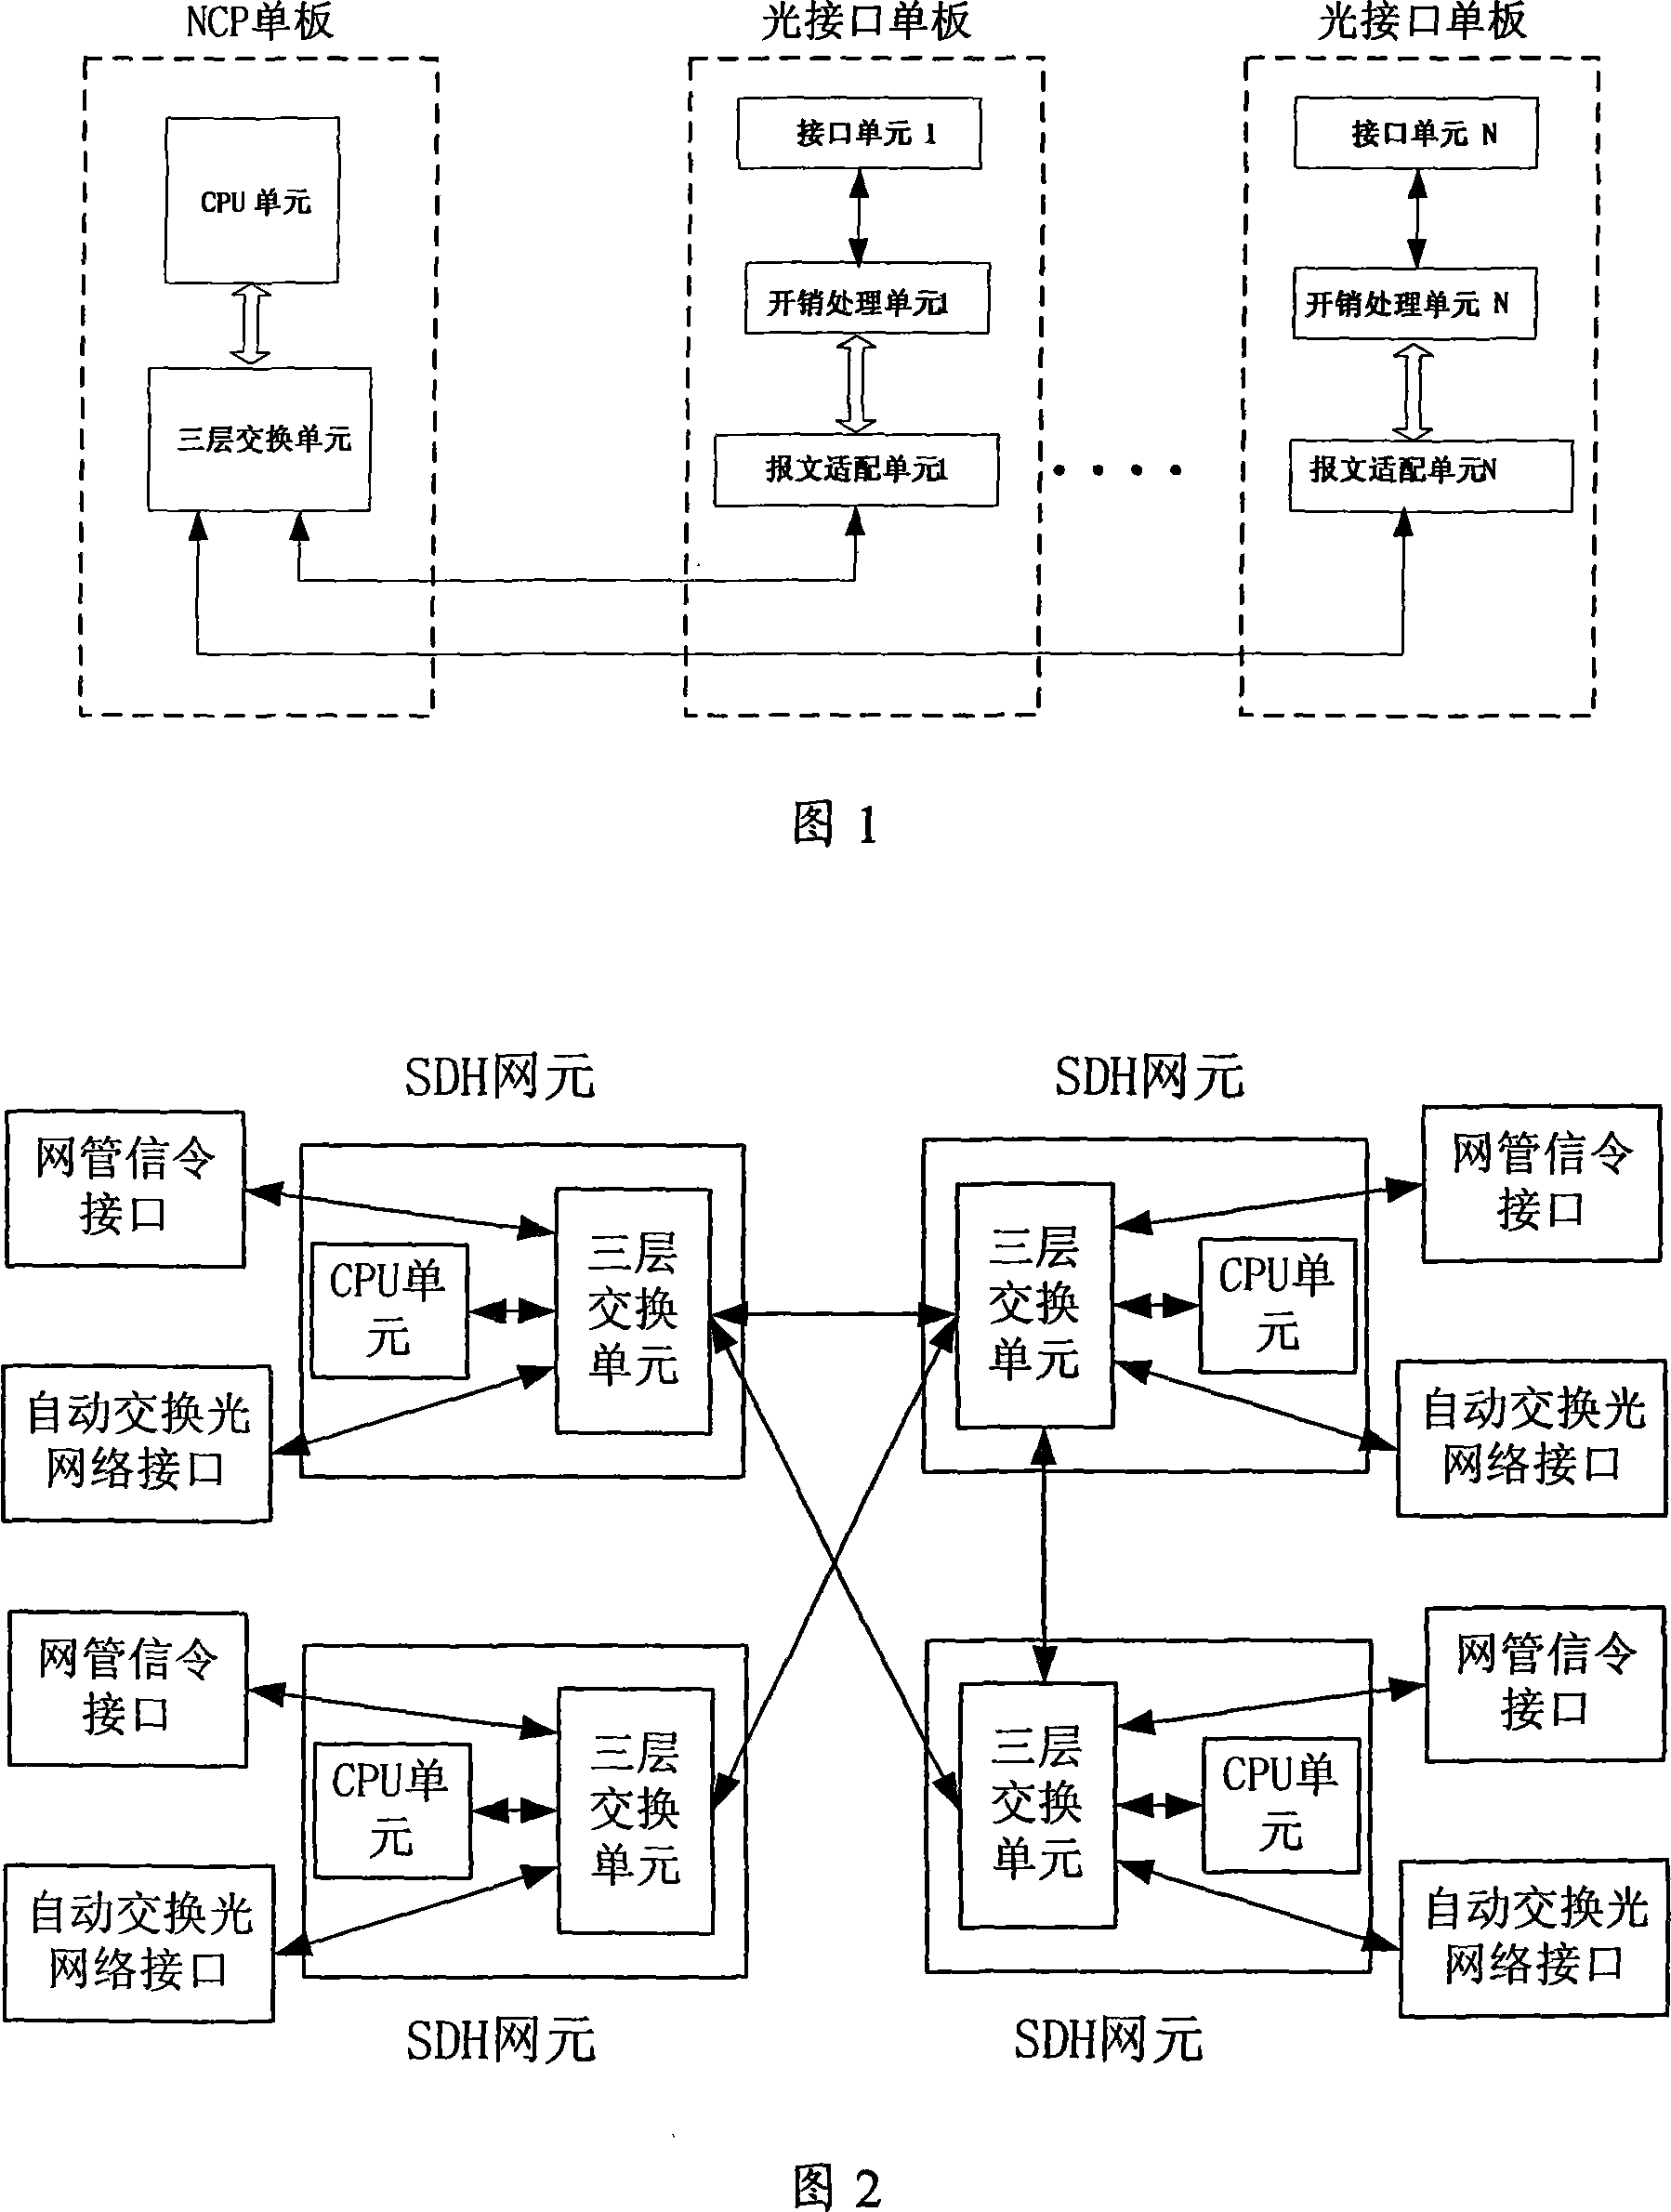 A device and method for realizing signaling communication network and network communication network channel